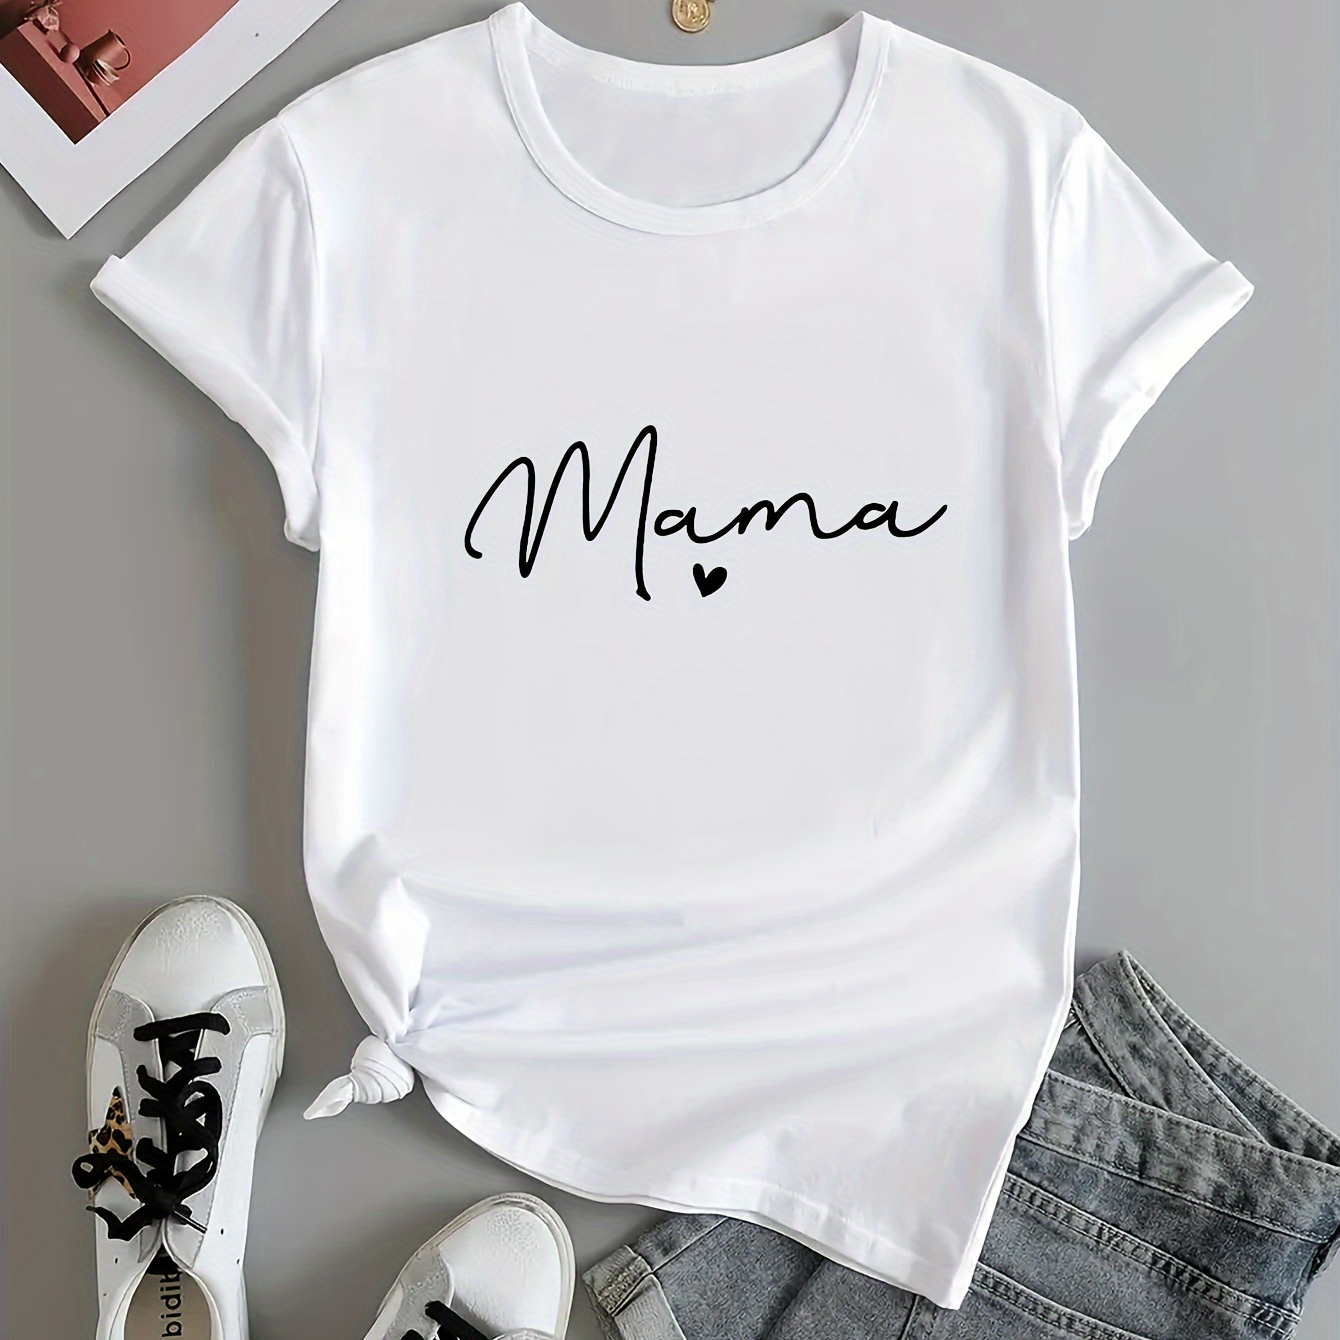 

Mama Letter Print T-shirt, Casual Crew Neck Short Sleeve Top For Spring & Summer, Women's Clothing